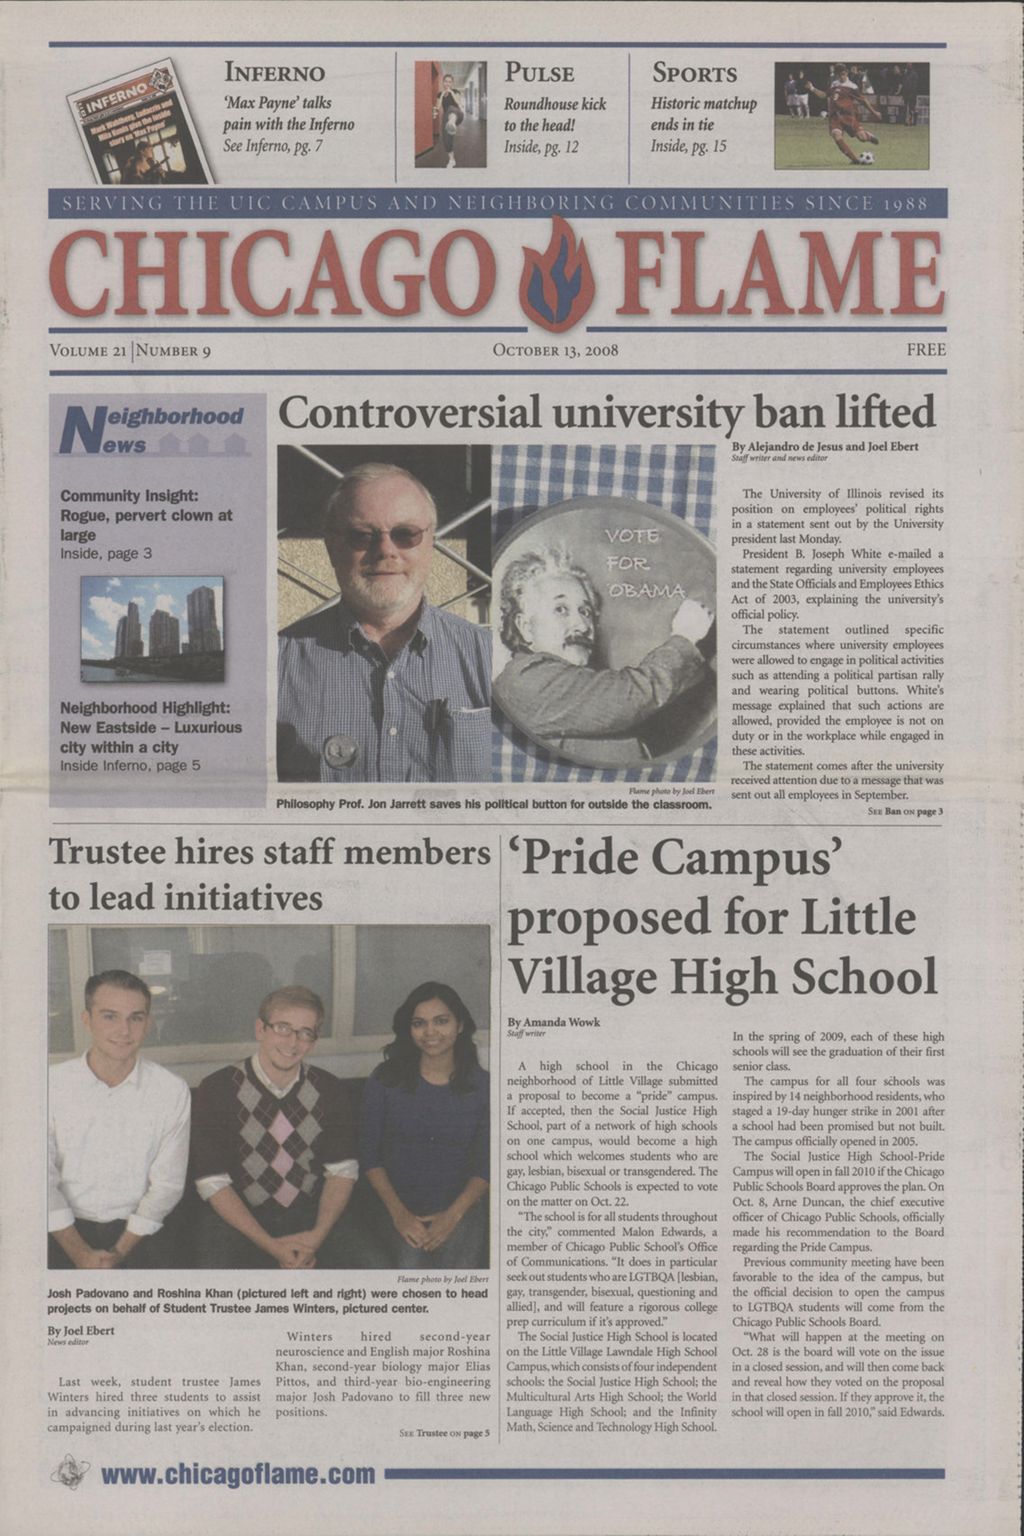 Miniature of Chicago Flame (October 13, 2008)